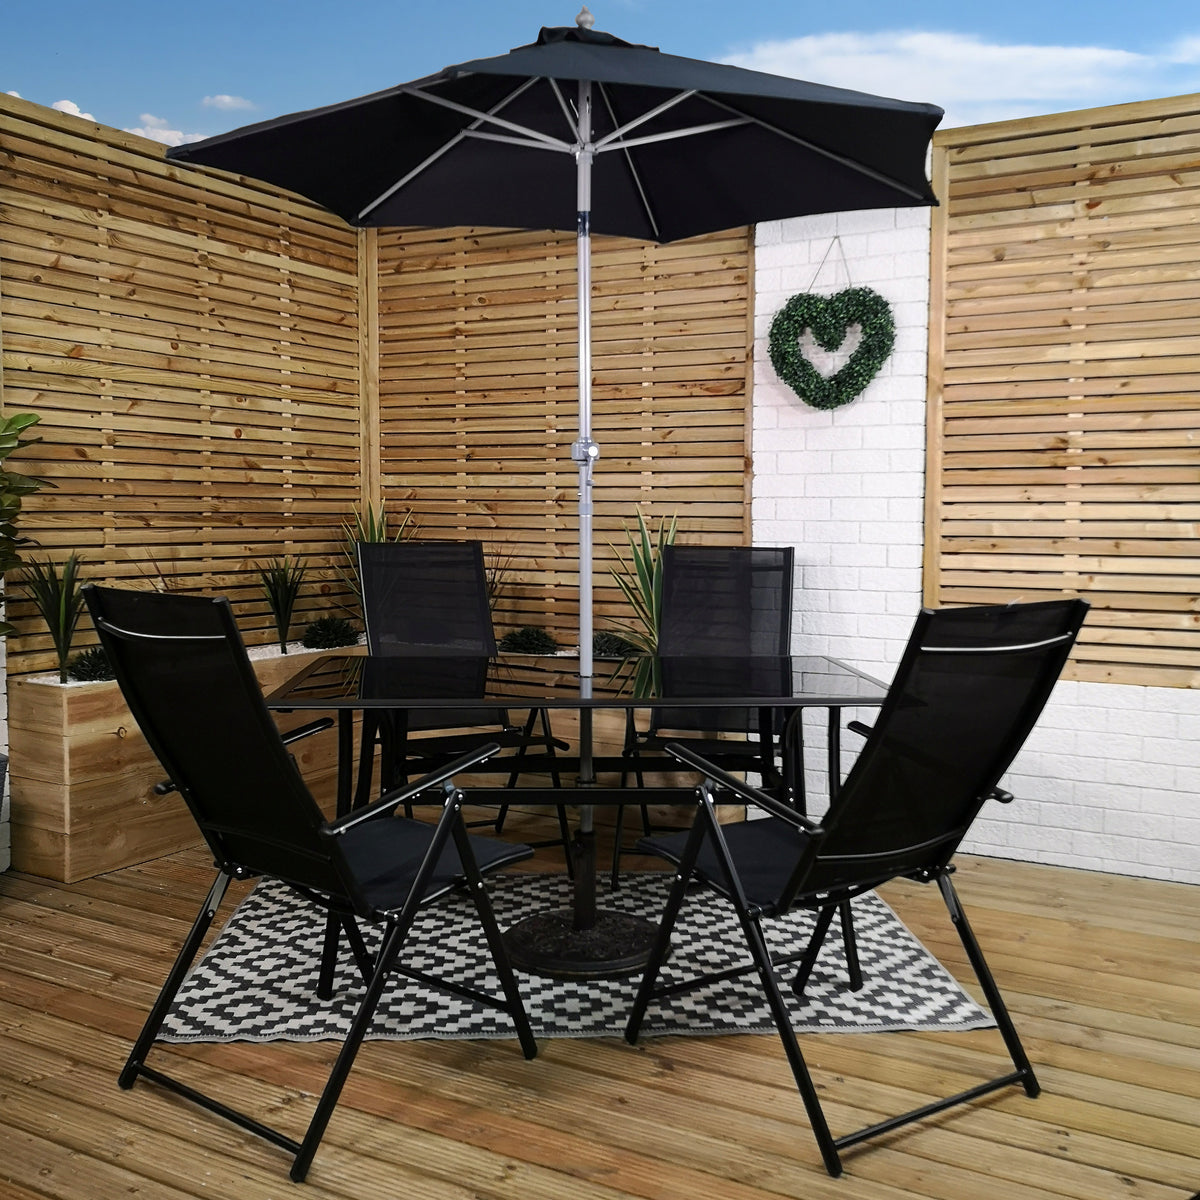 Outdoor 4 Person Rectangular Glass Top Garden Patio Dining Table Chairs With Black Parasol and Base Set